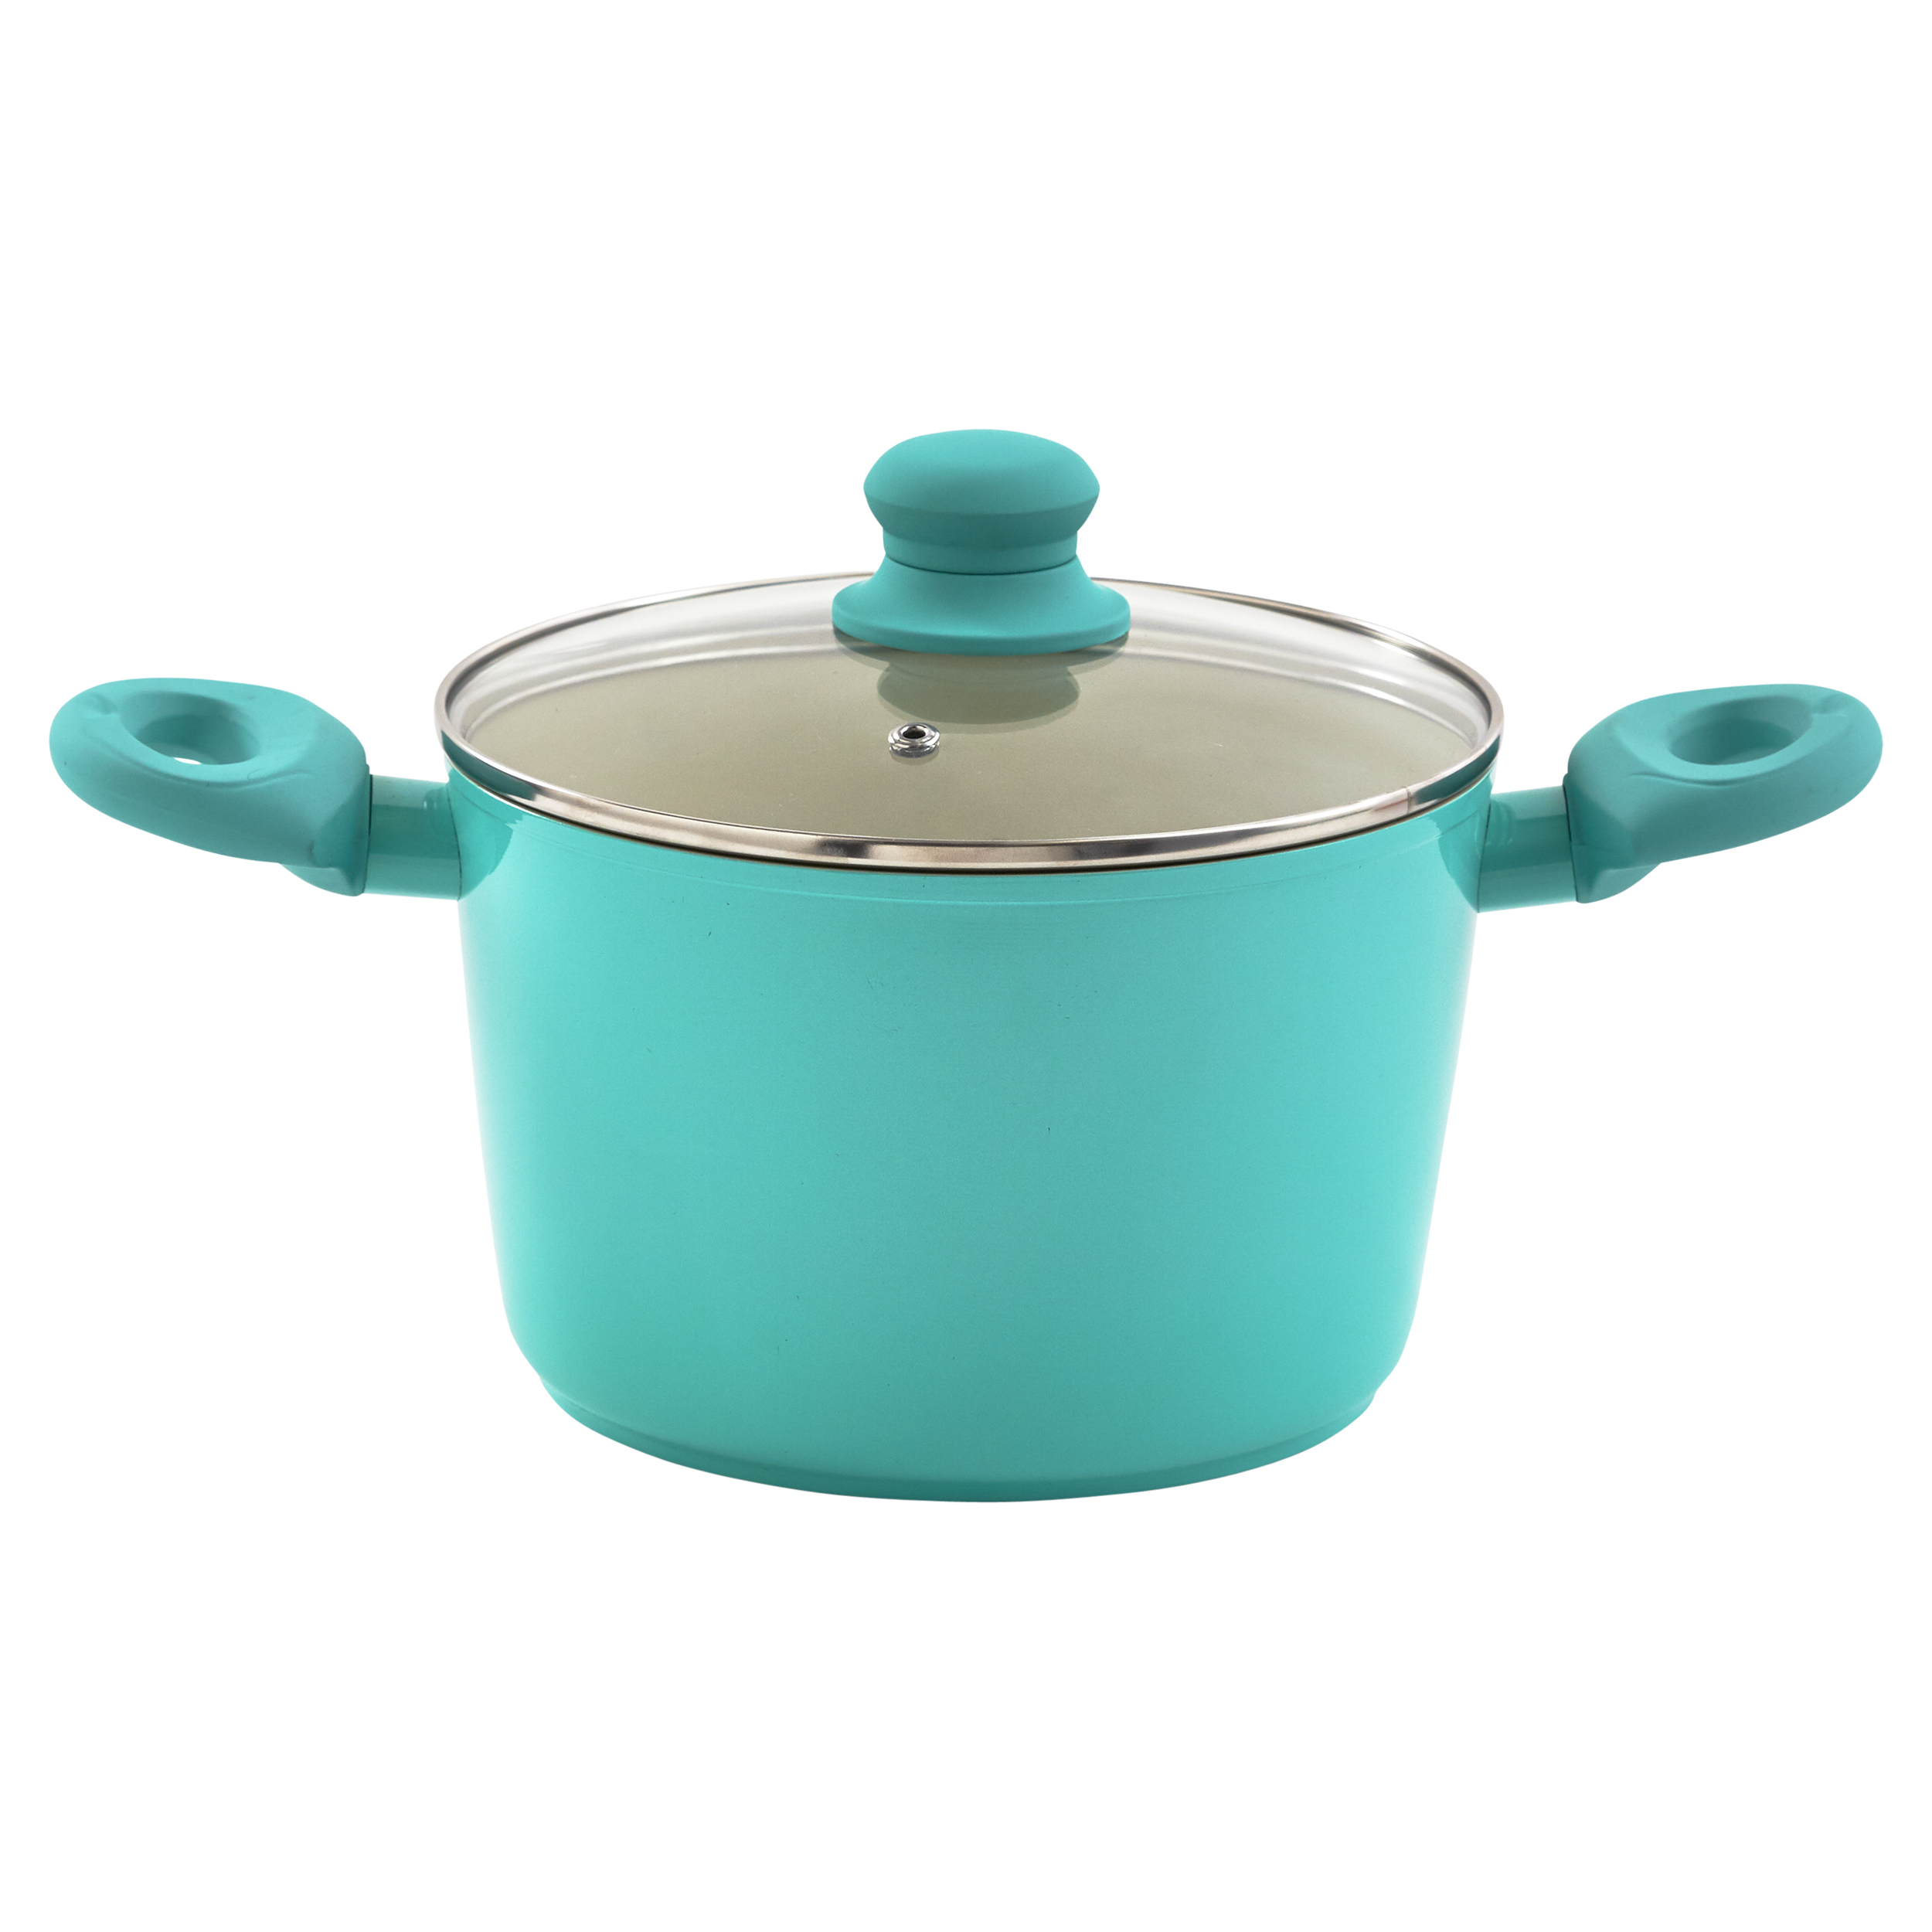 IMUSA IMUSA Ceramic PTFE Nonstick Forged Aluminum Stock Pot with Glass Lid  & Soft Touch Handle 5 Quarts, Teal - IMUSA